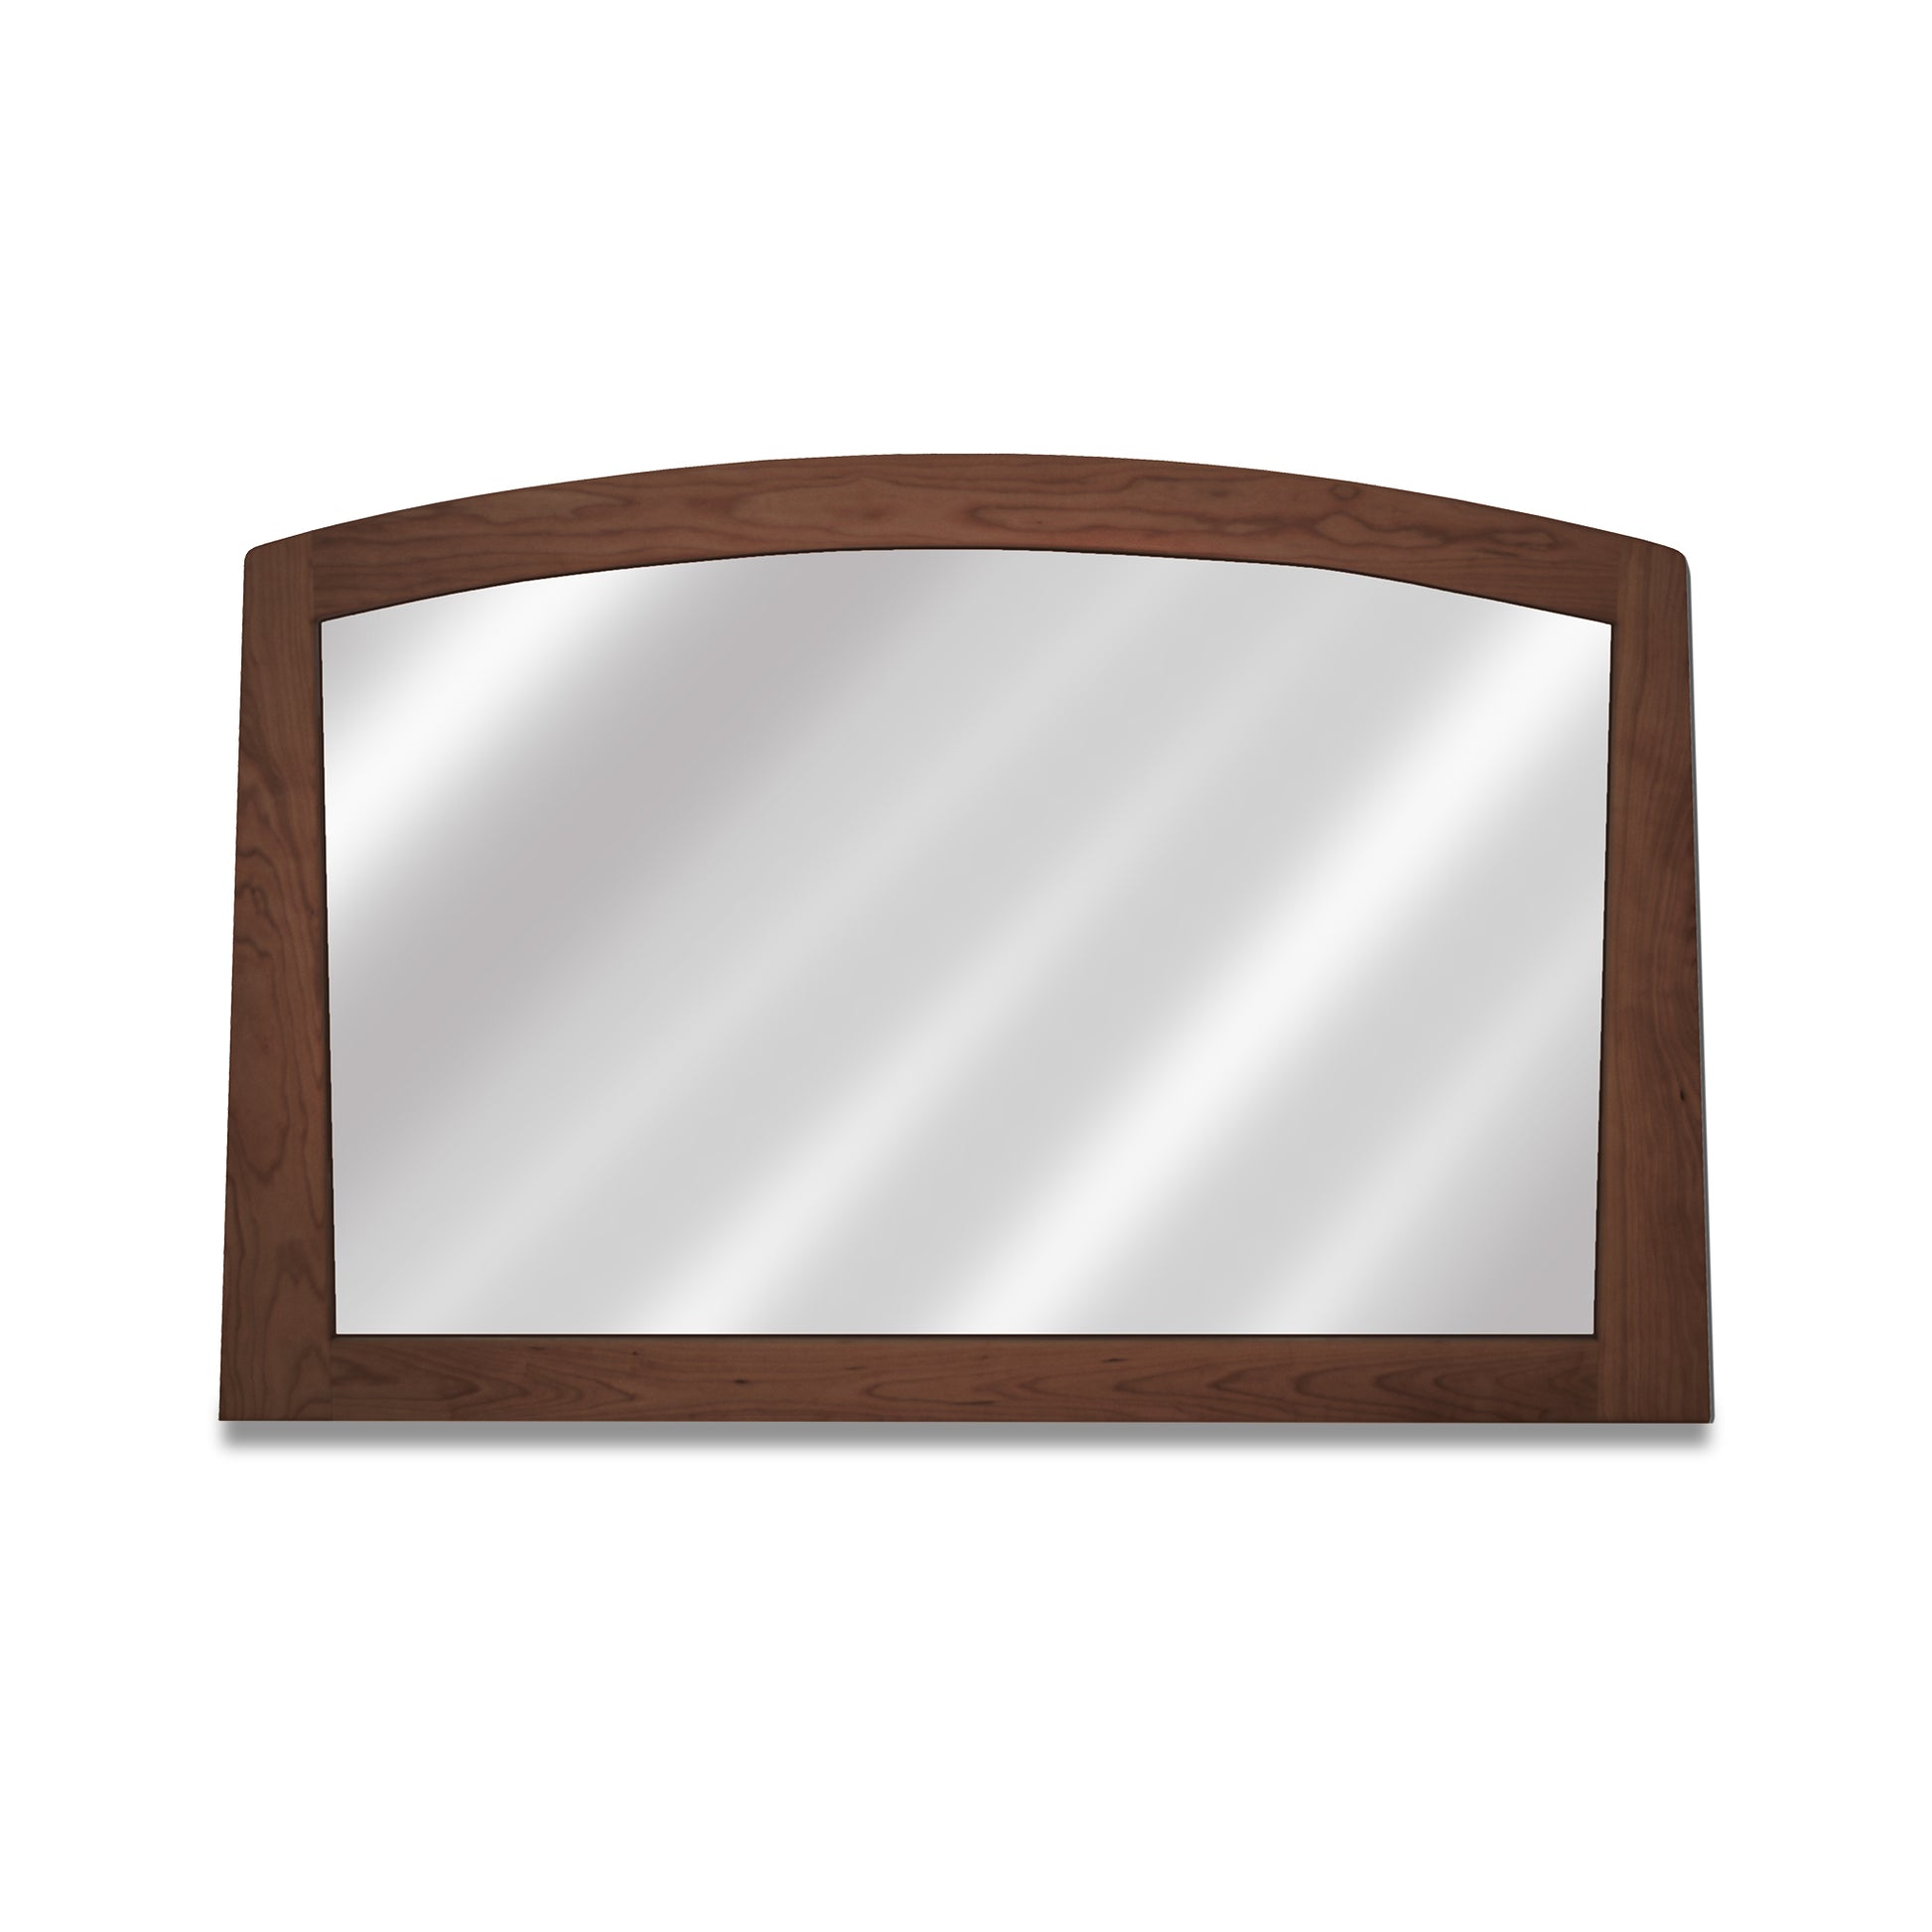 A handcrafted Cherry Moon Horizontal Mirror by Maple Corner Woodworks on a white background.